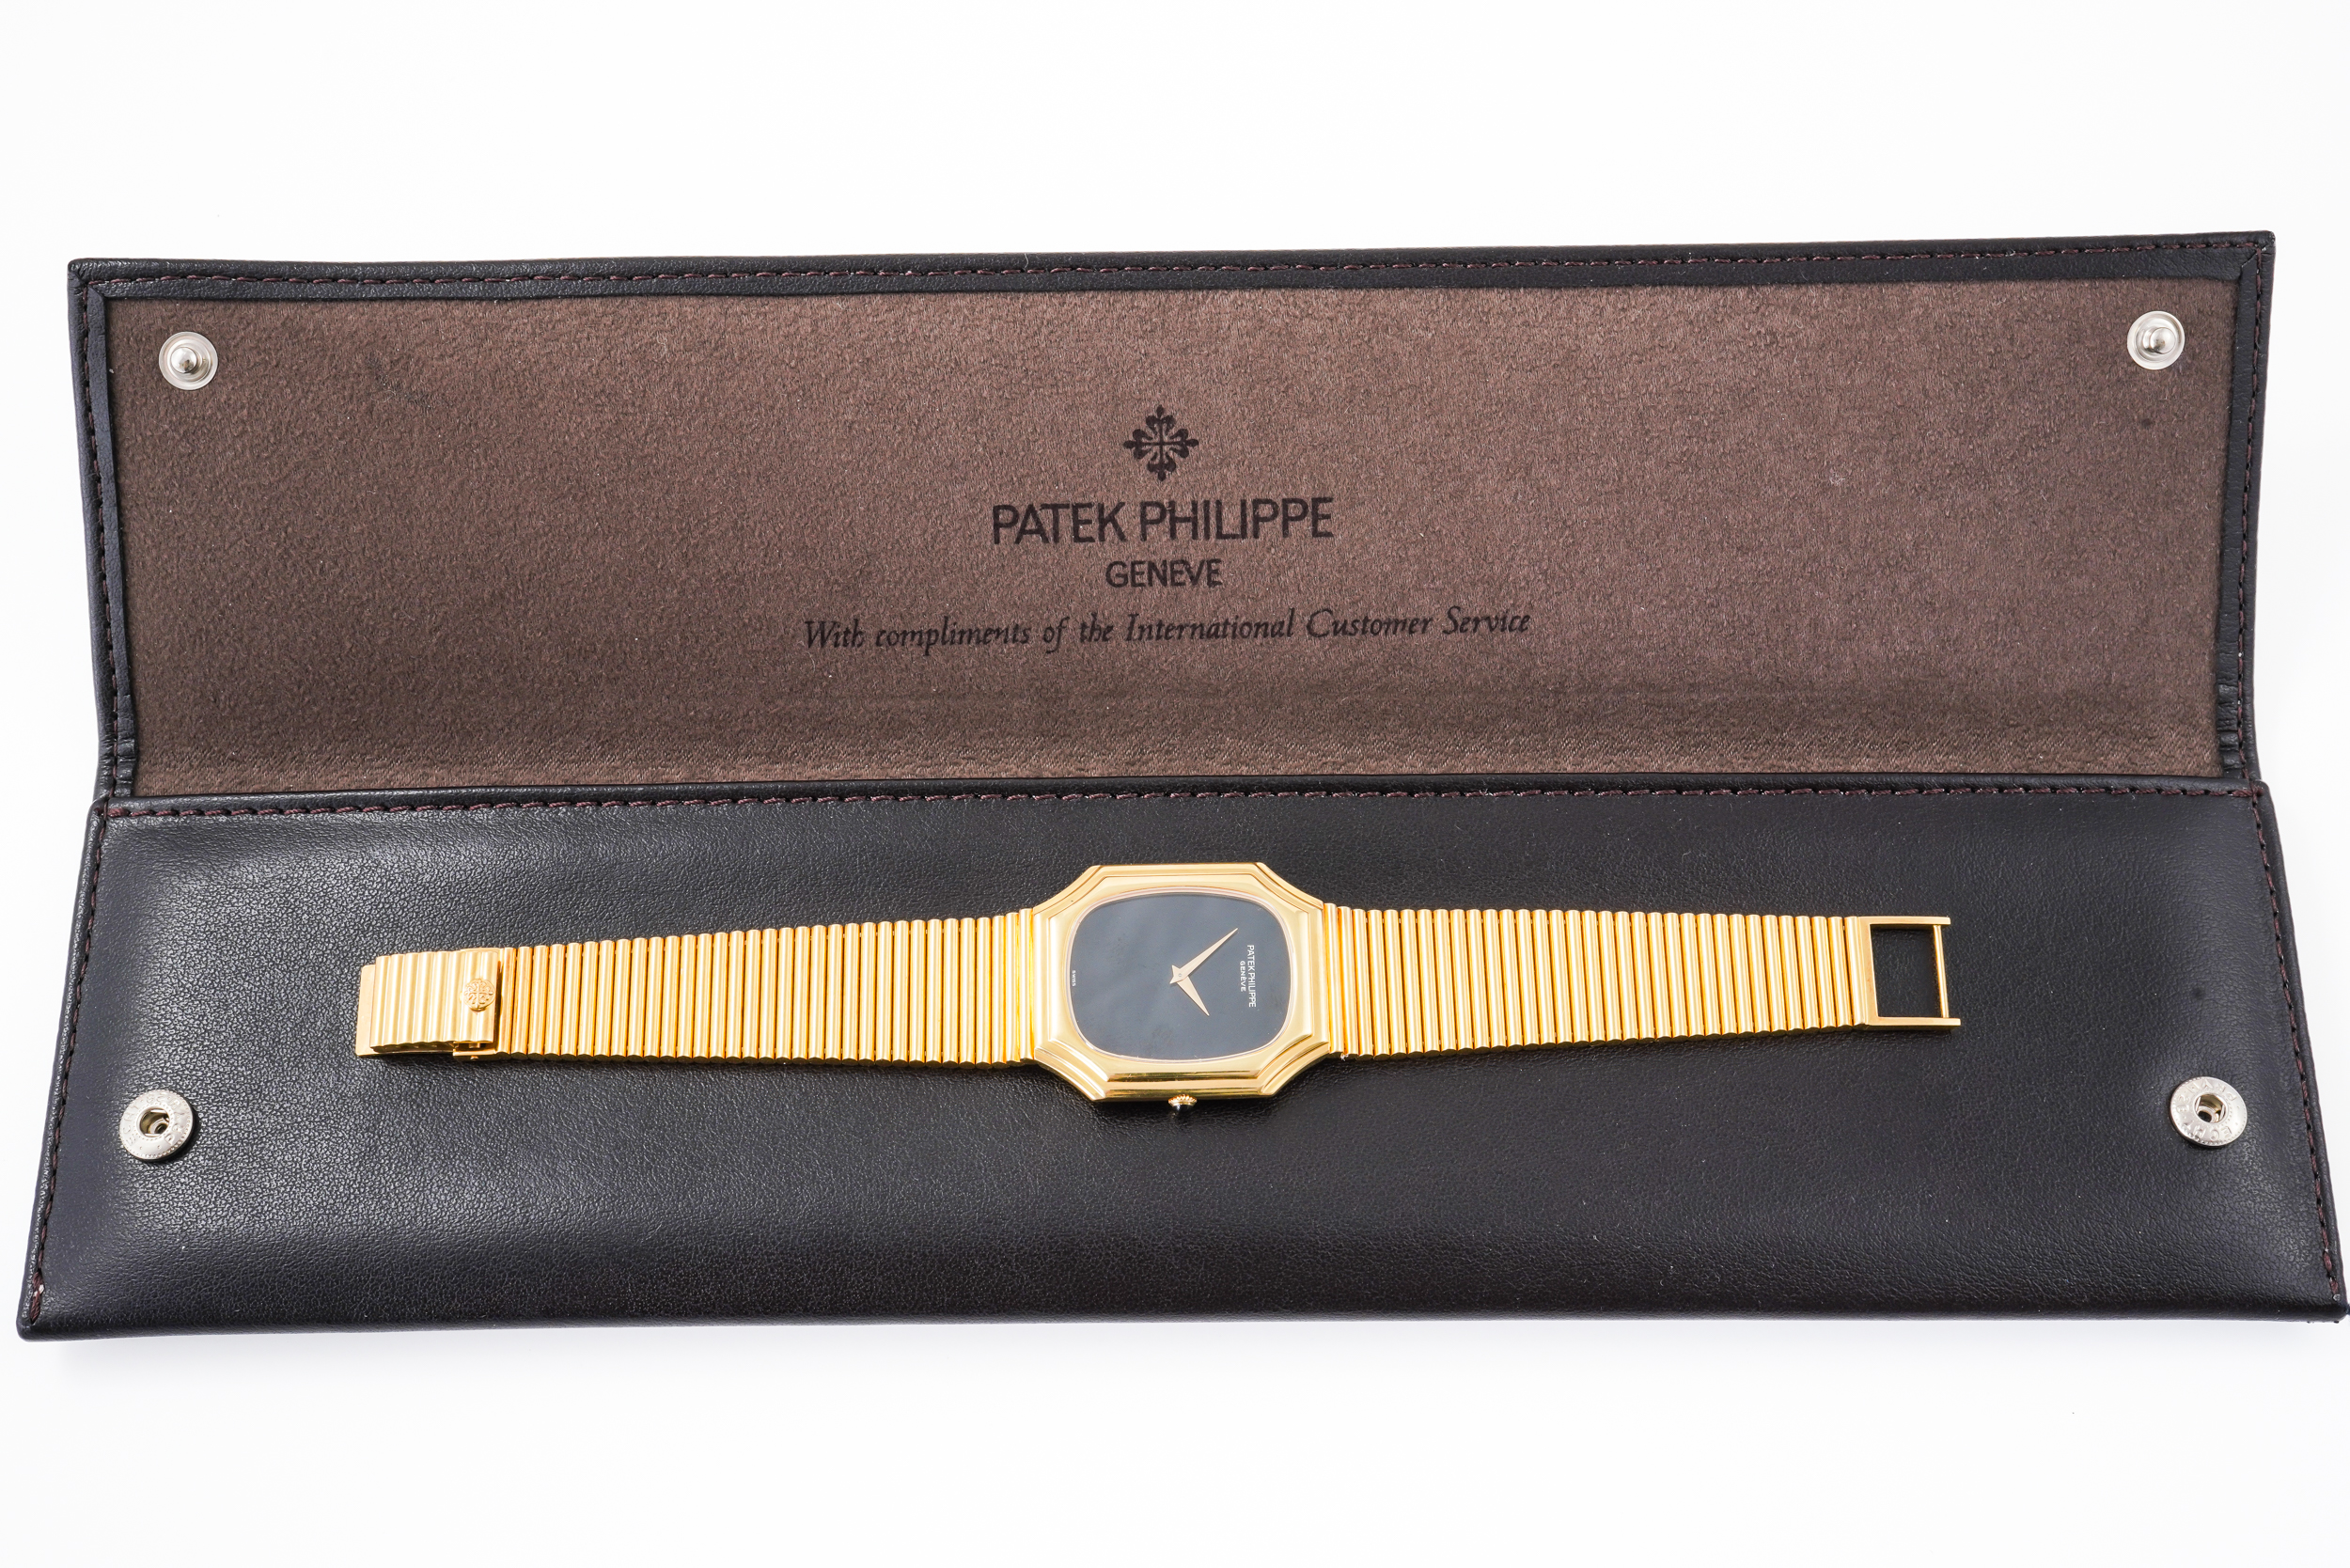 PATEK PHILIPPE 3729 GENTLEMAN'S GOLD WATCH WITH ONYX DIAL - Image 12 of 12